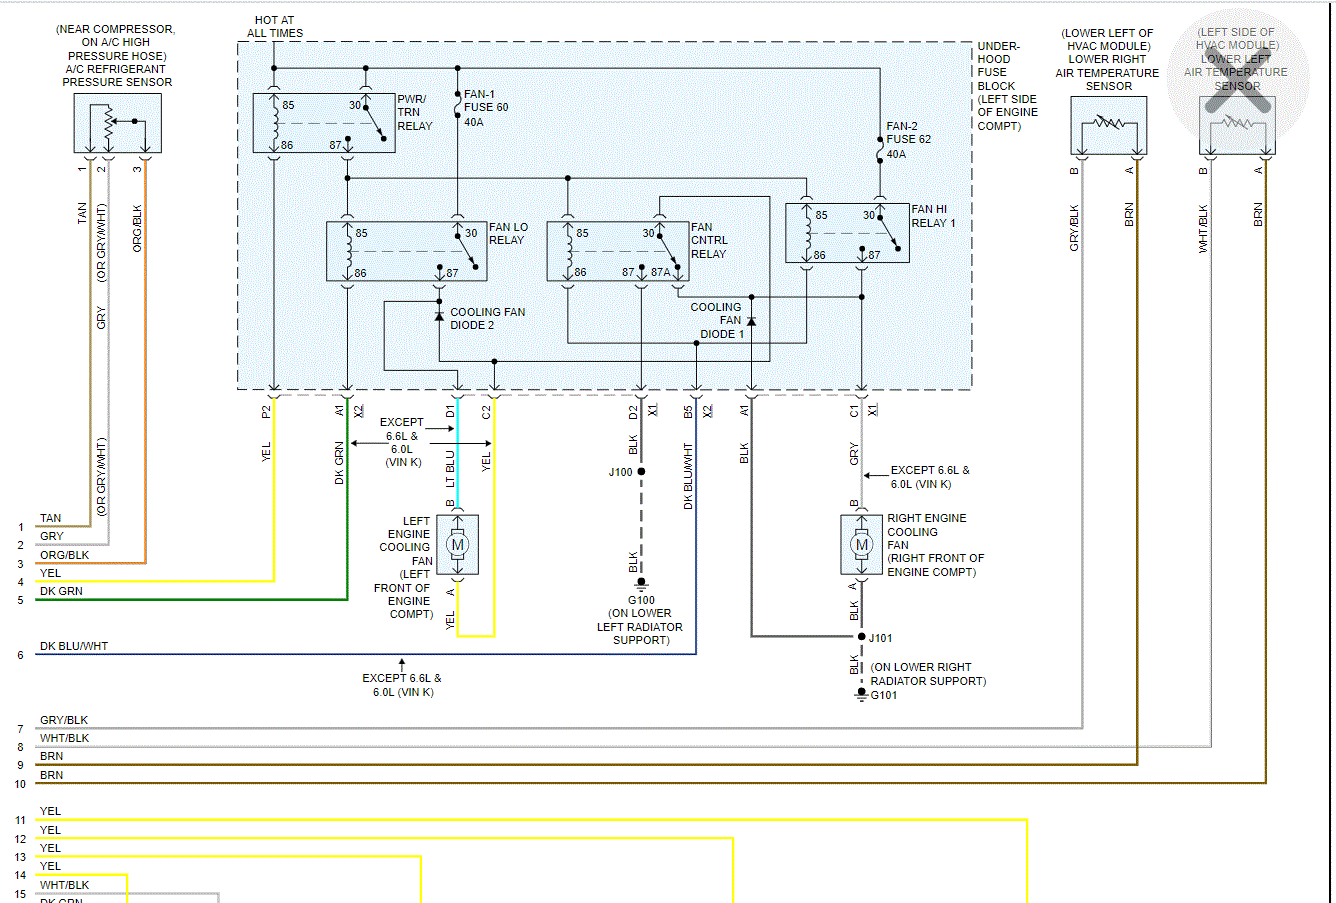 Hvac (heater AC) Wiring Diagrams Please?: Have An Issue with A/C